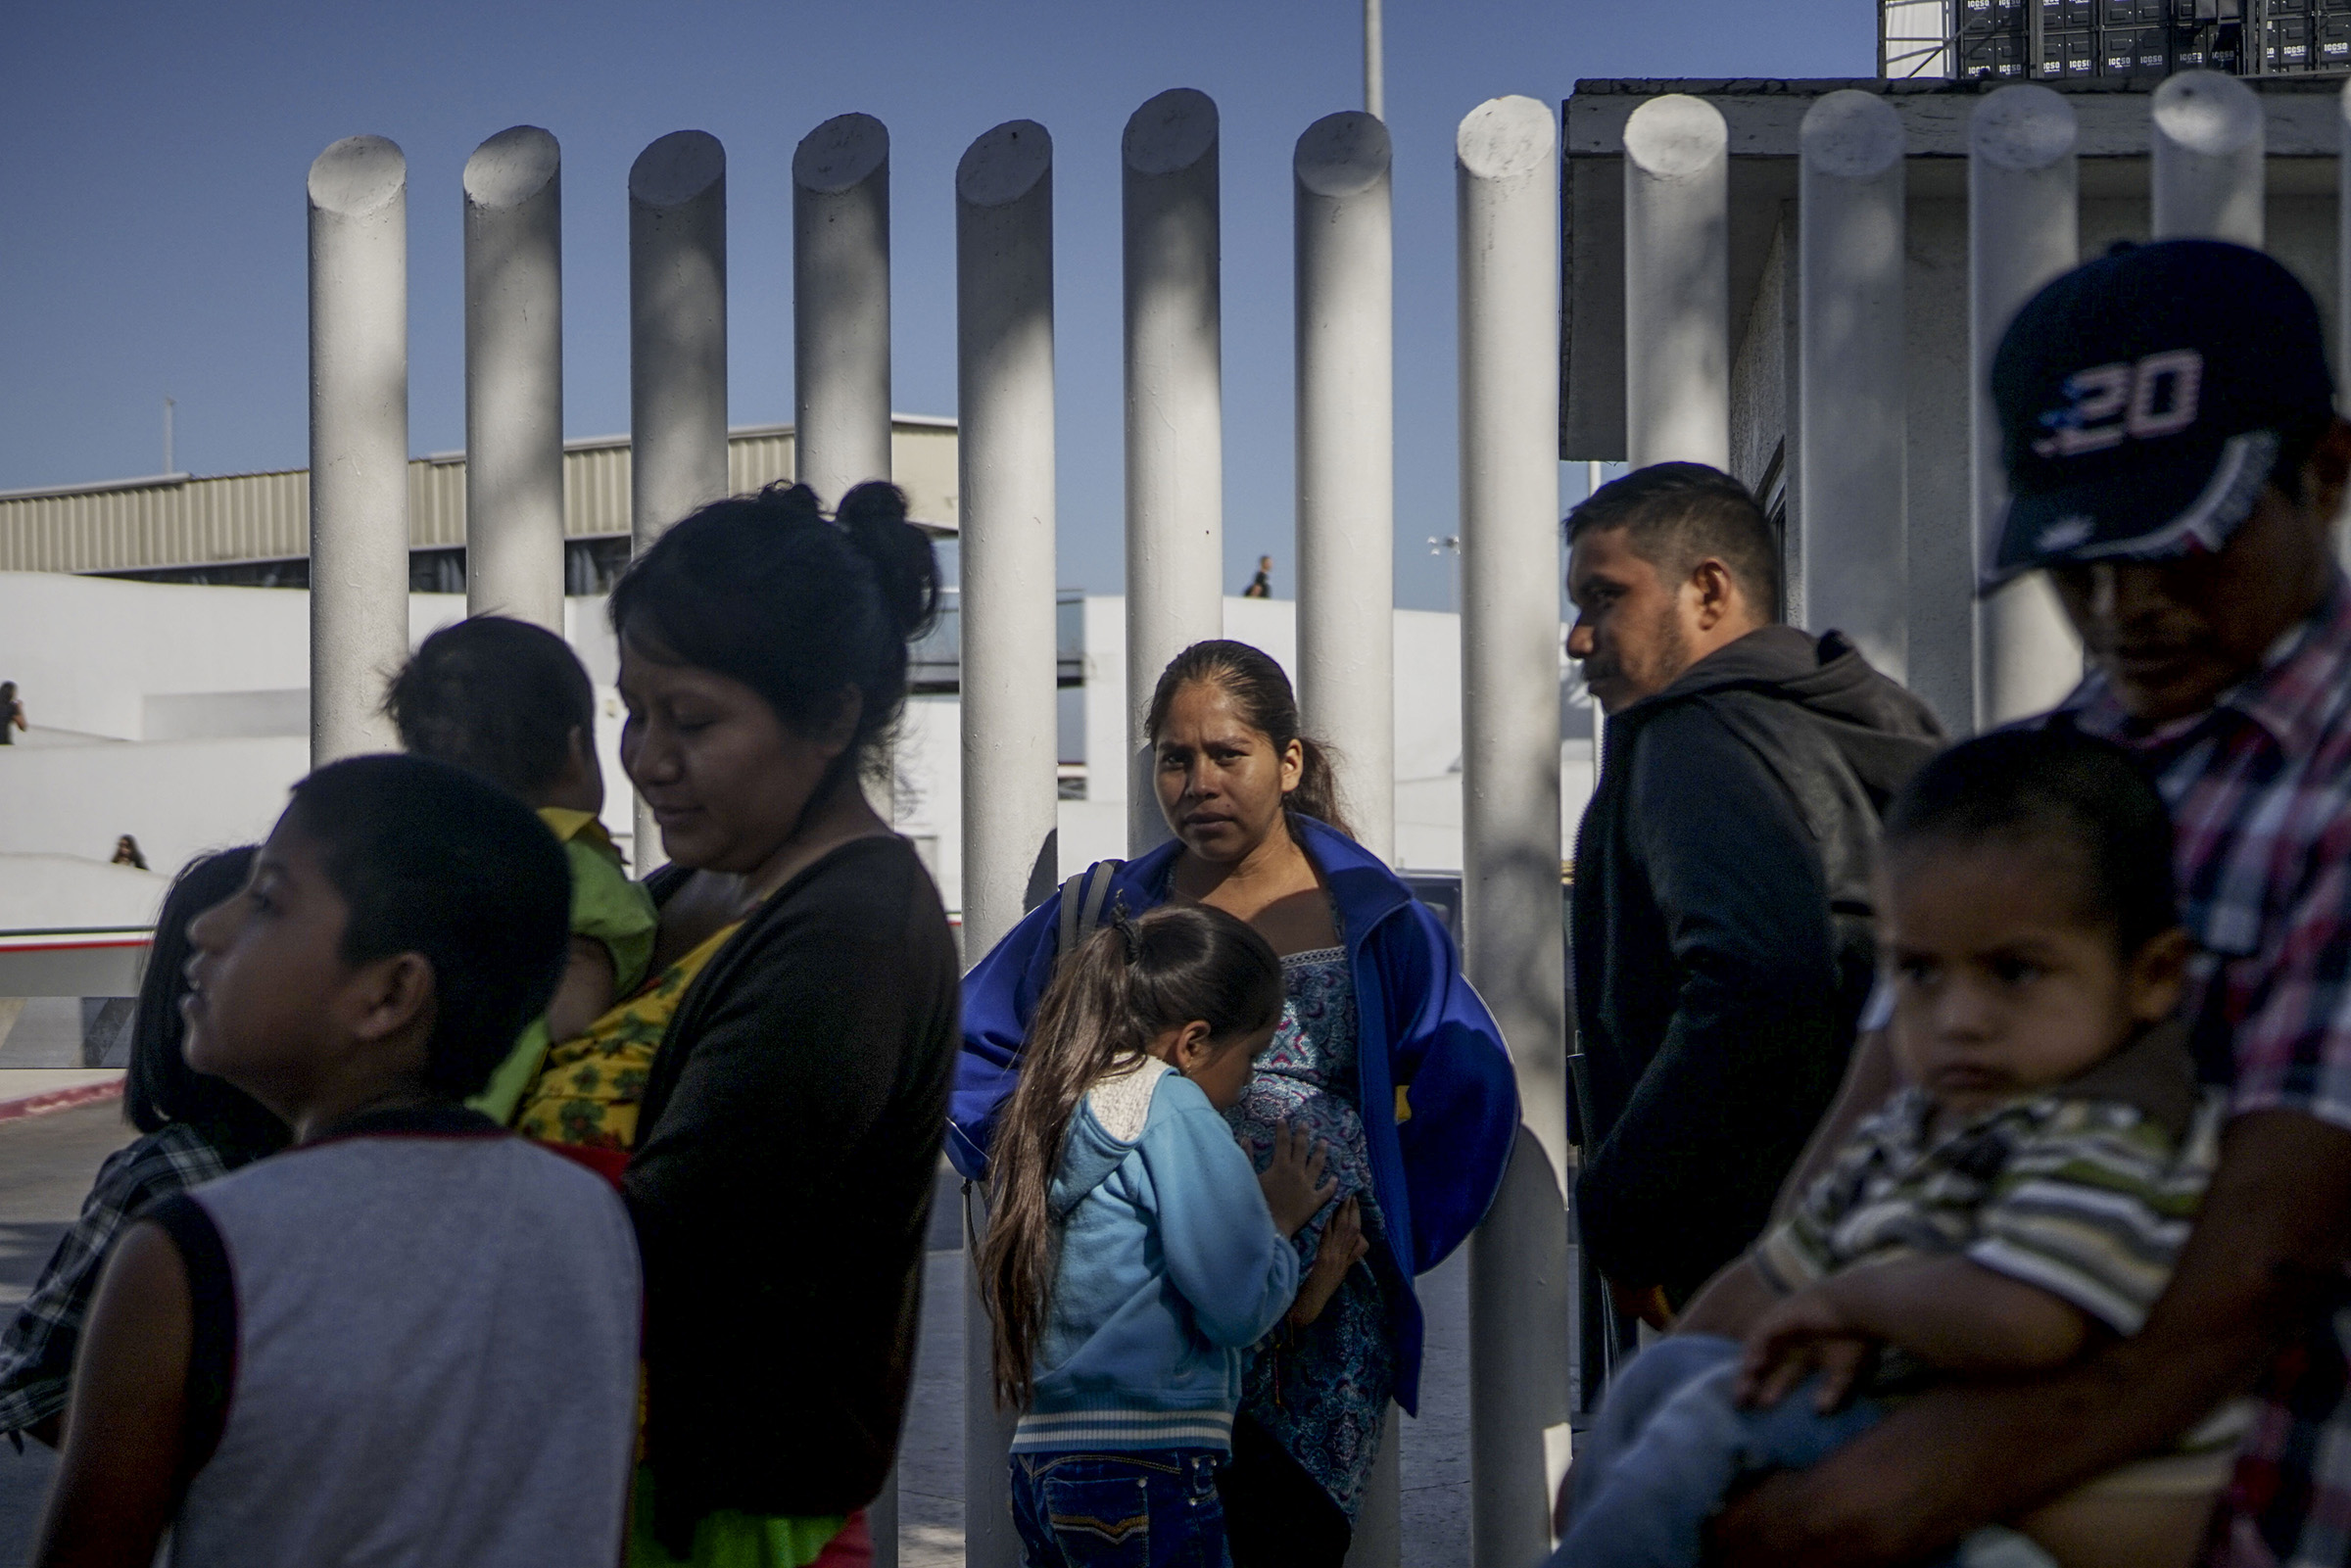 Migrants wait in line at the Mexico-United States border crossing in Tijuana, Mexico on September 12, 2019. (Sandy Huffaker—AFP/Getty Images)